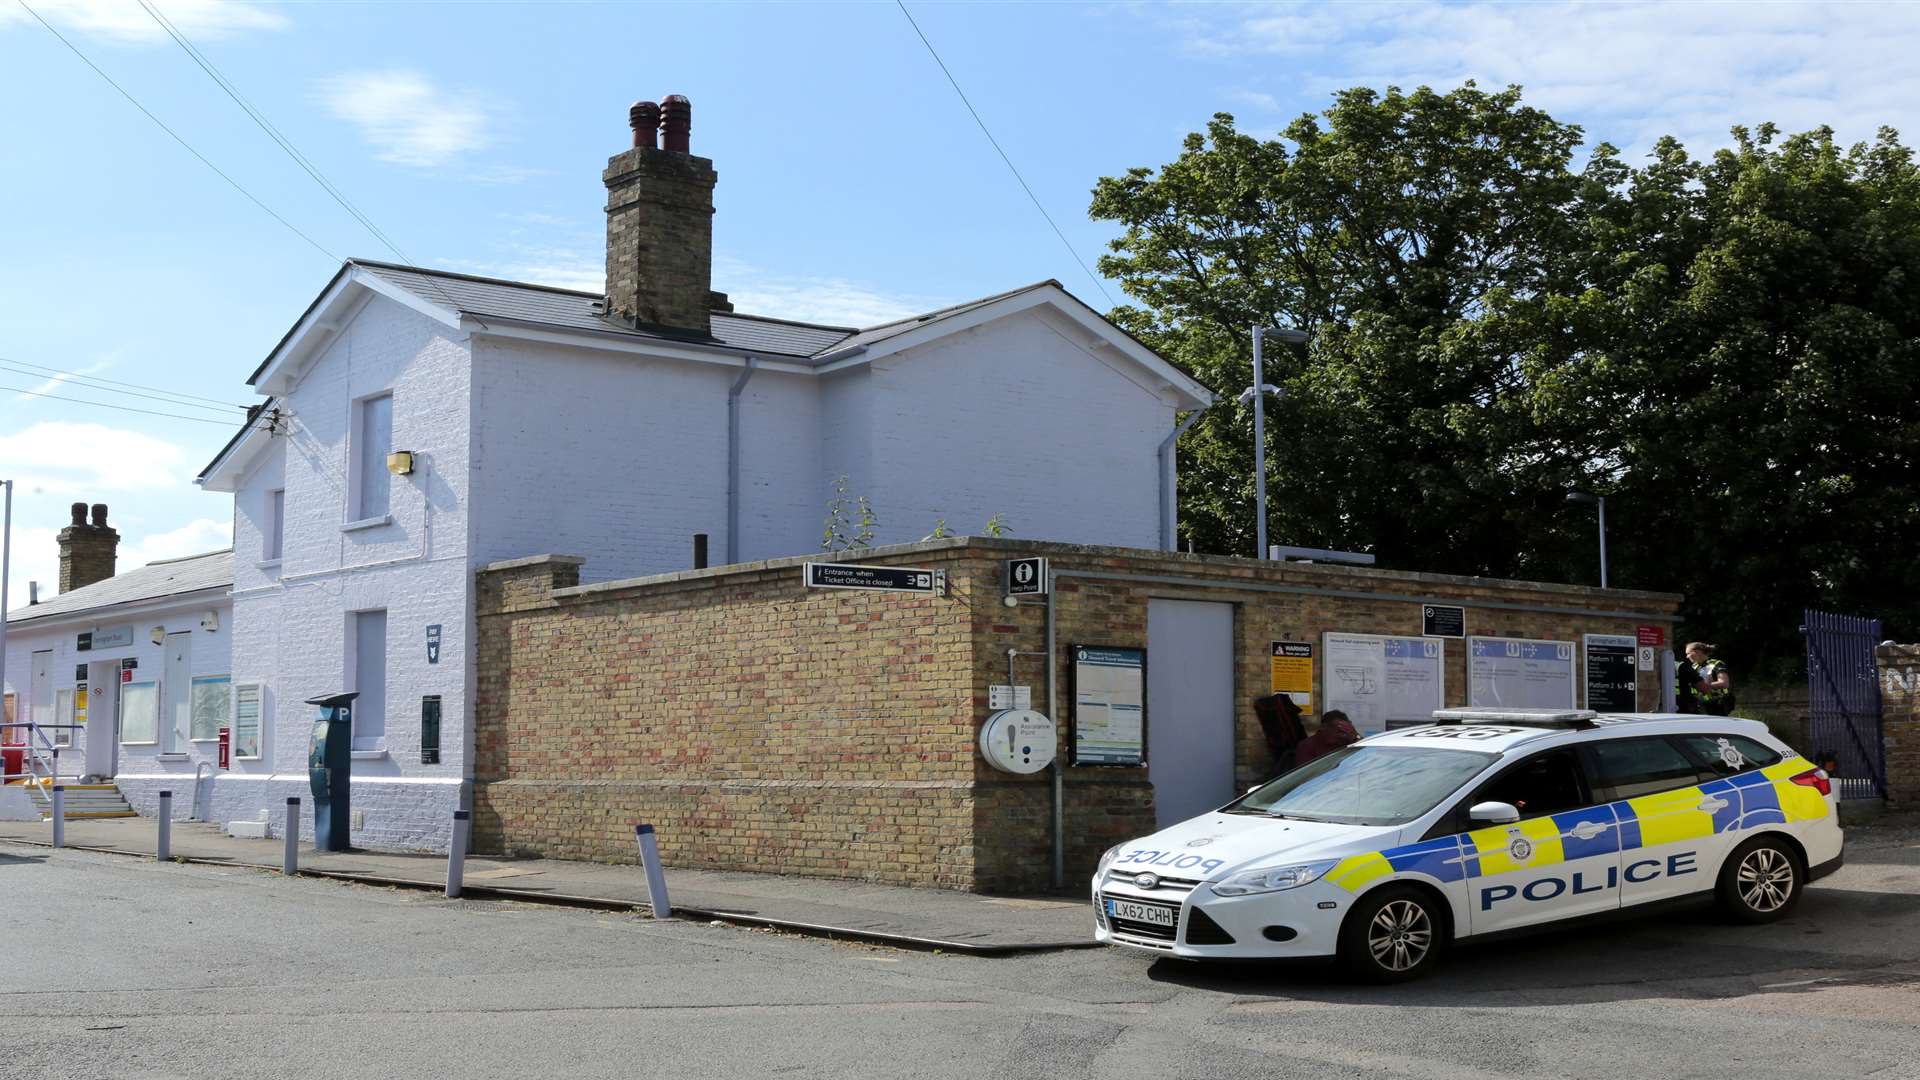 The man died after being hit by a train at Farningham Road Station, Station Road, Farningham